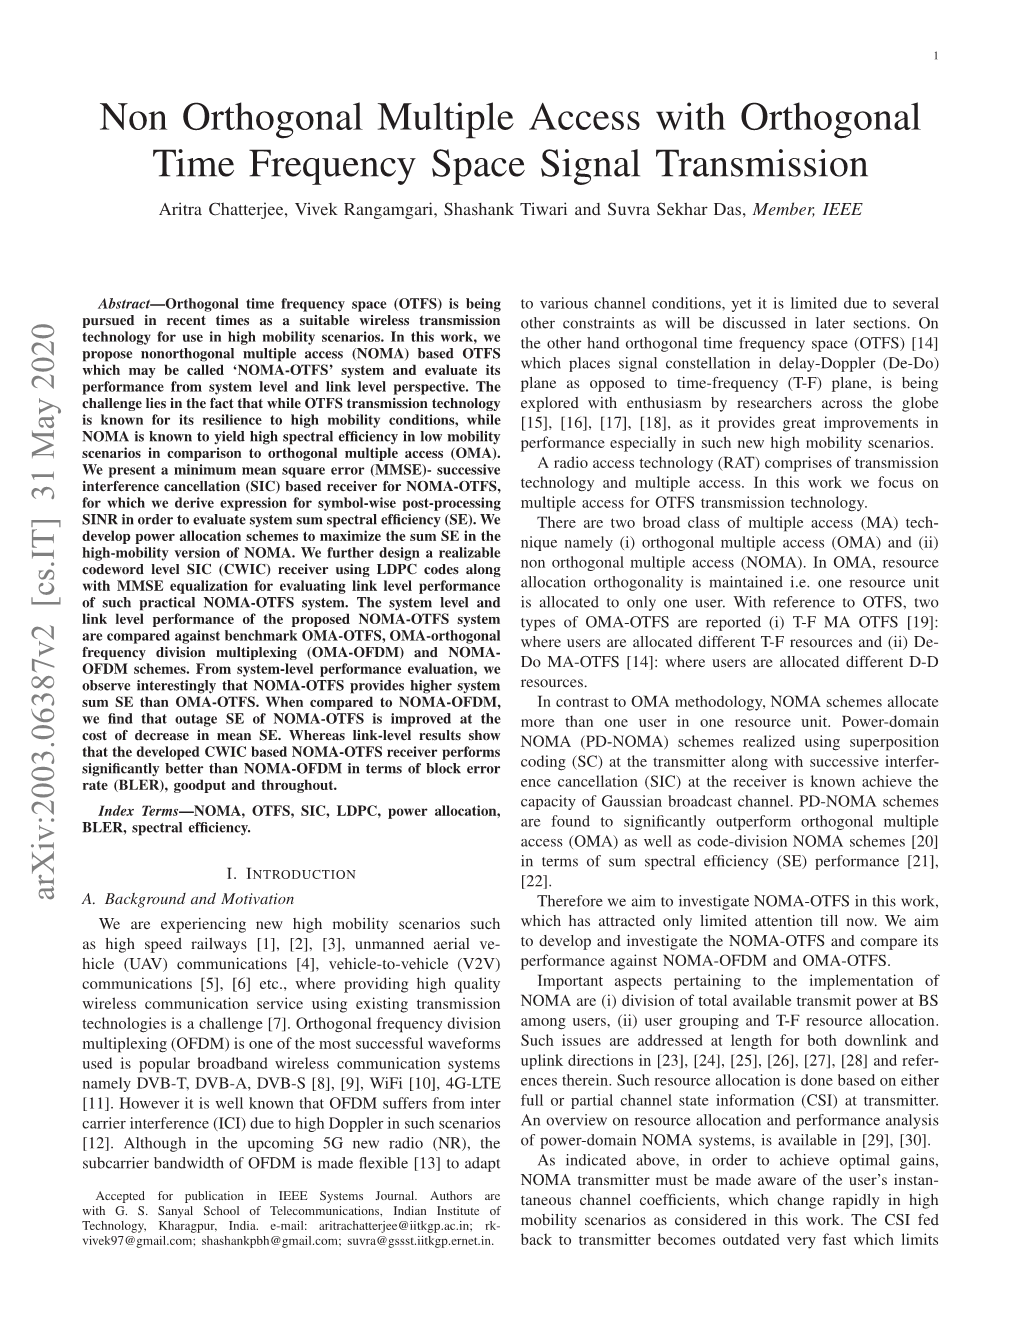 Non Orthogonal Multiple Access with Orthogonal Time Frequency Space Signal Transmission